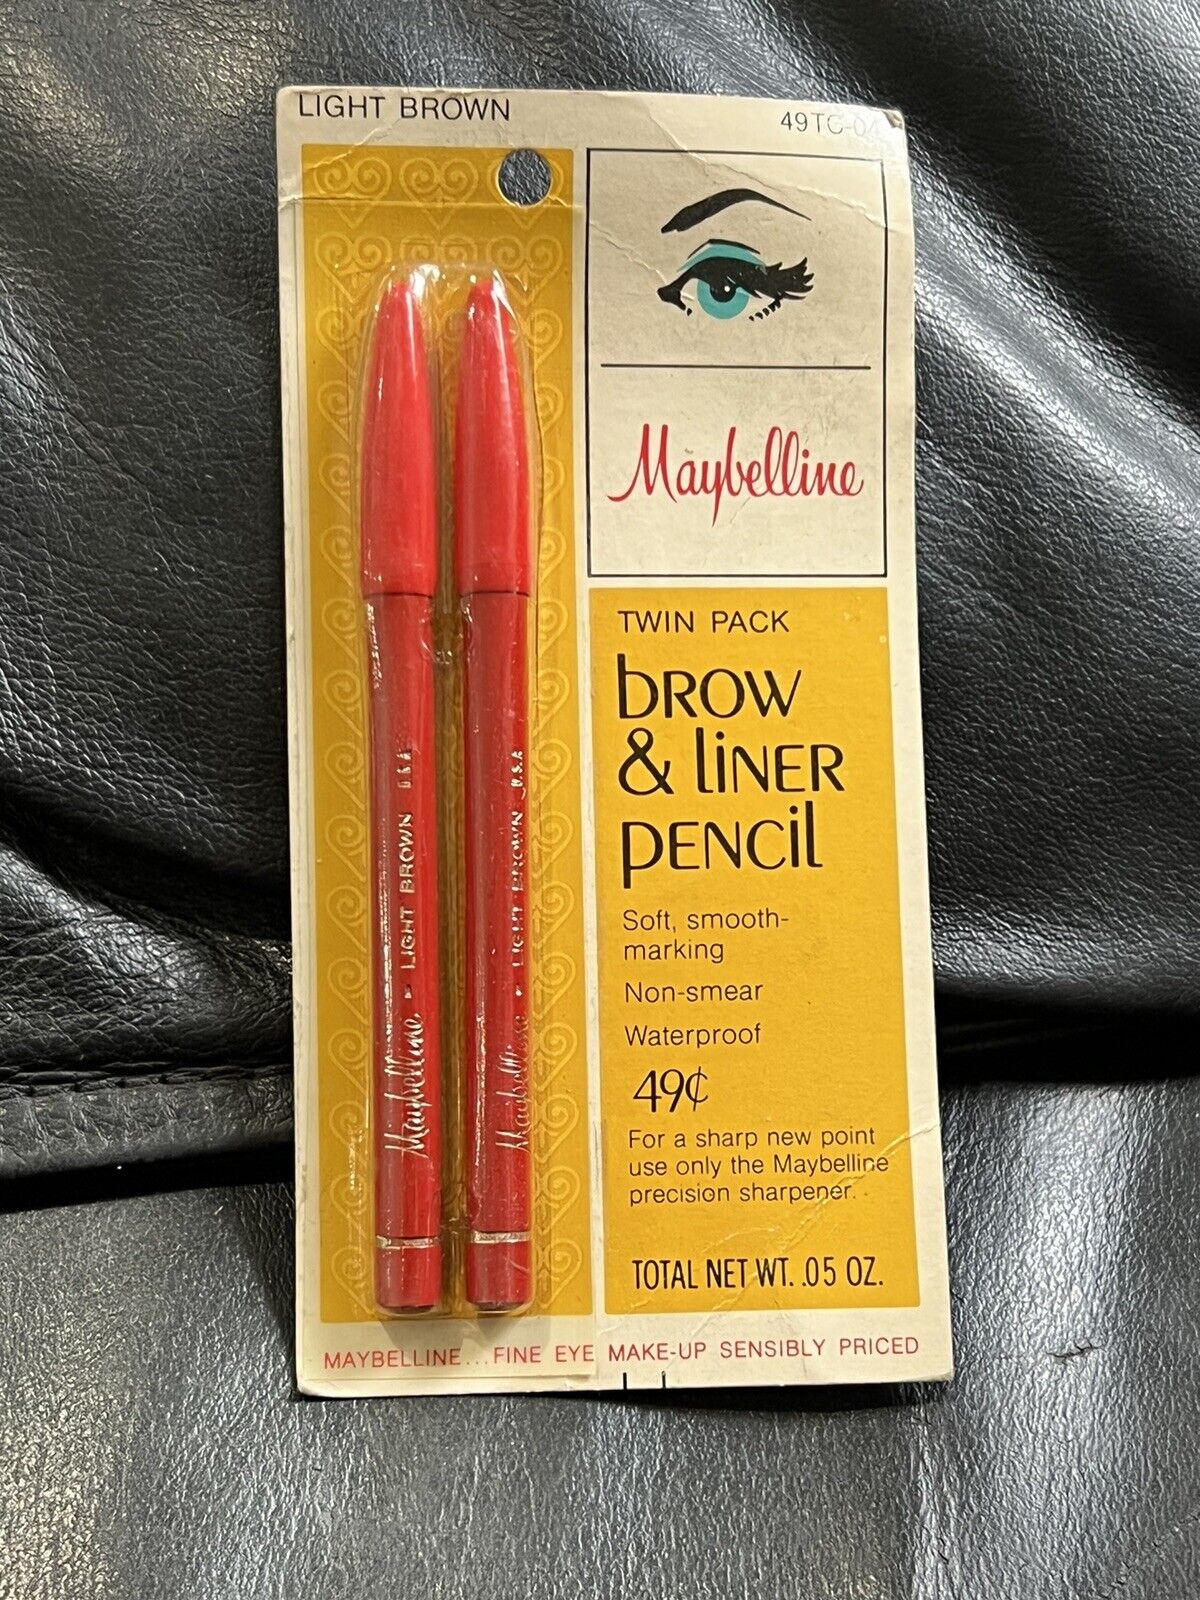 VINTAGE MAYBELLINE TWIN PACK BROW AND EYE LINER PENCIL LIGHT BROWN 49TC-04 NEW